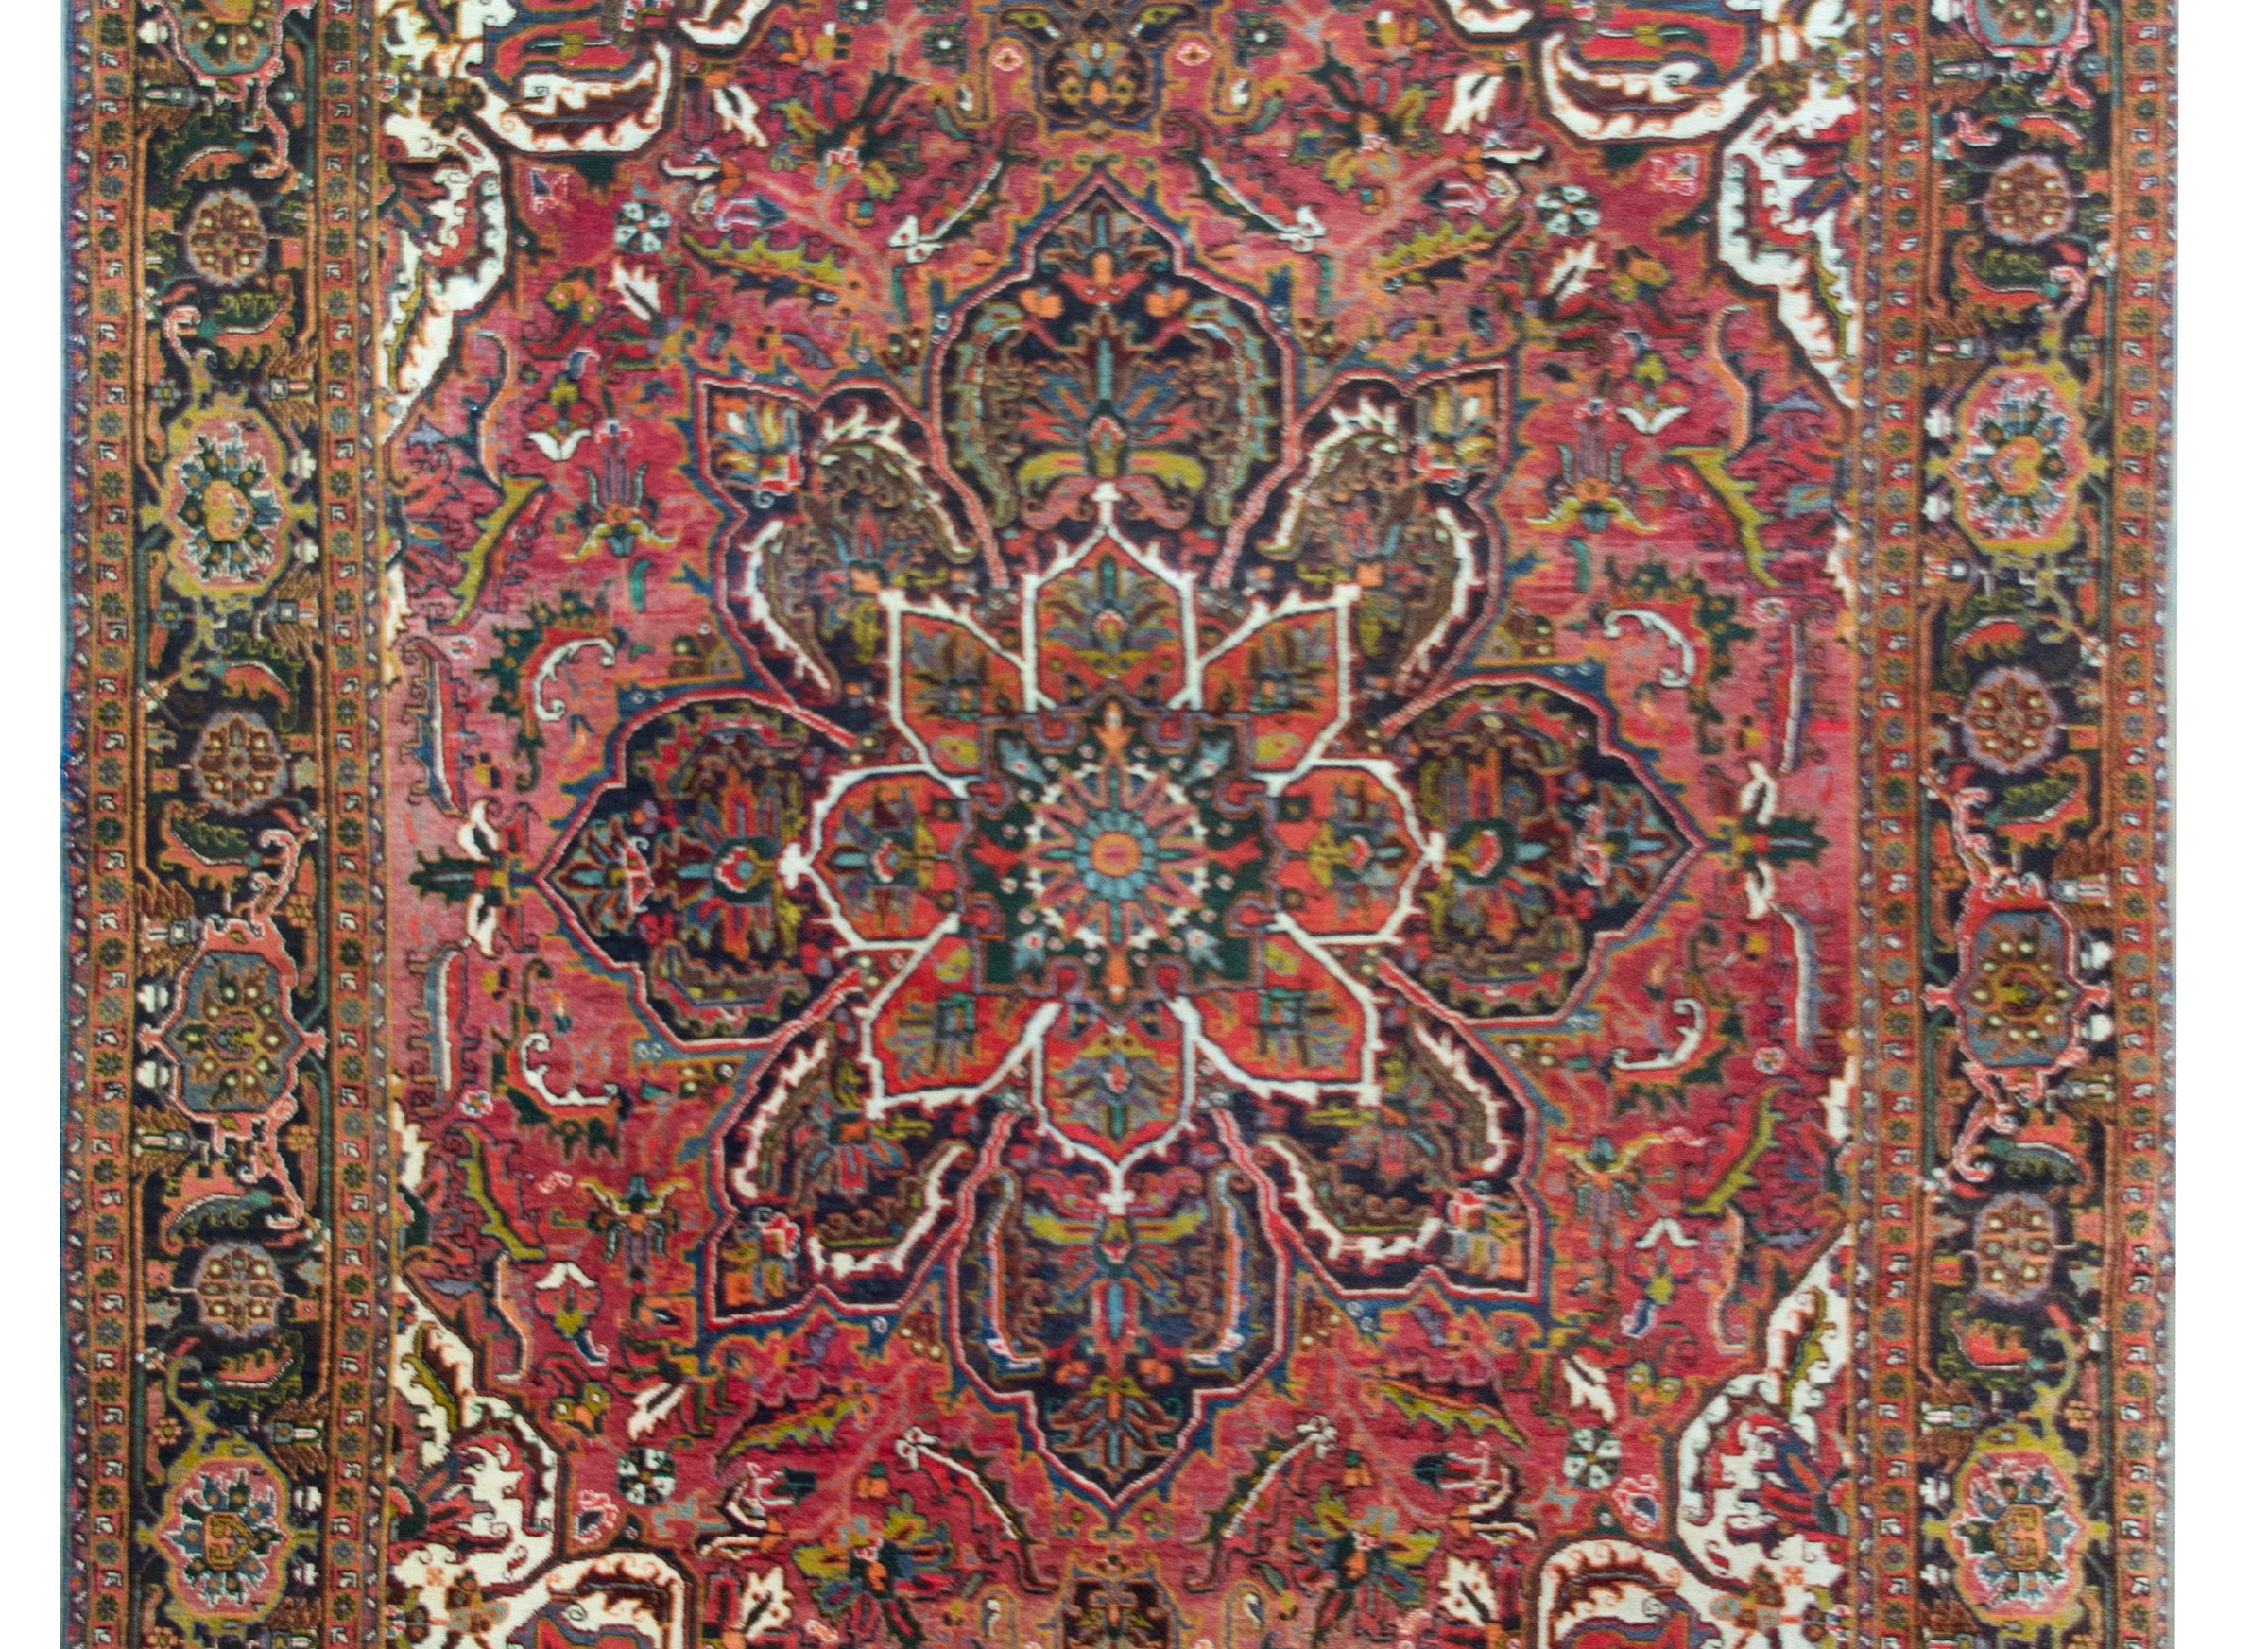 A mesmerizing vintage Persian Heriz rug with a large central floral medallion with an intensely woven floral, leaf, and scrolling pattern woven in myriad colors including crimson, green, orange, violet, and light and dark indigo, and surrounded by a